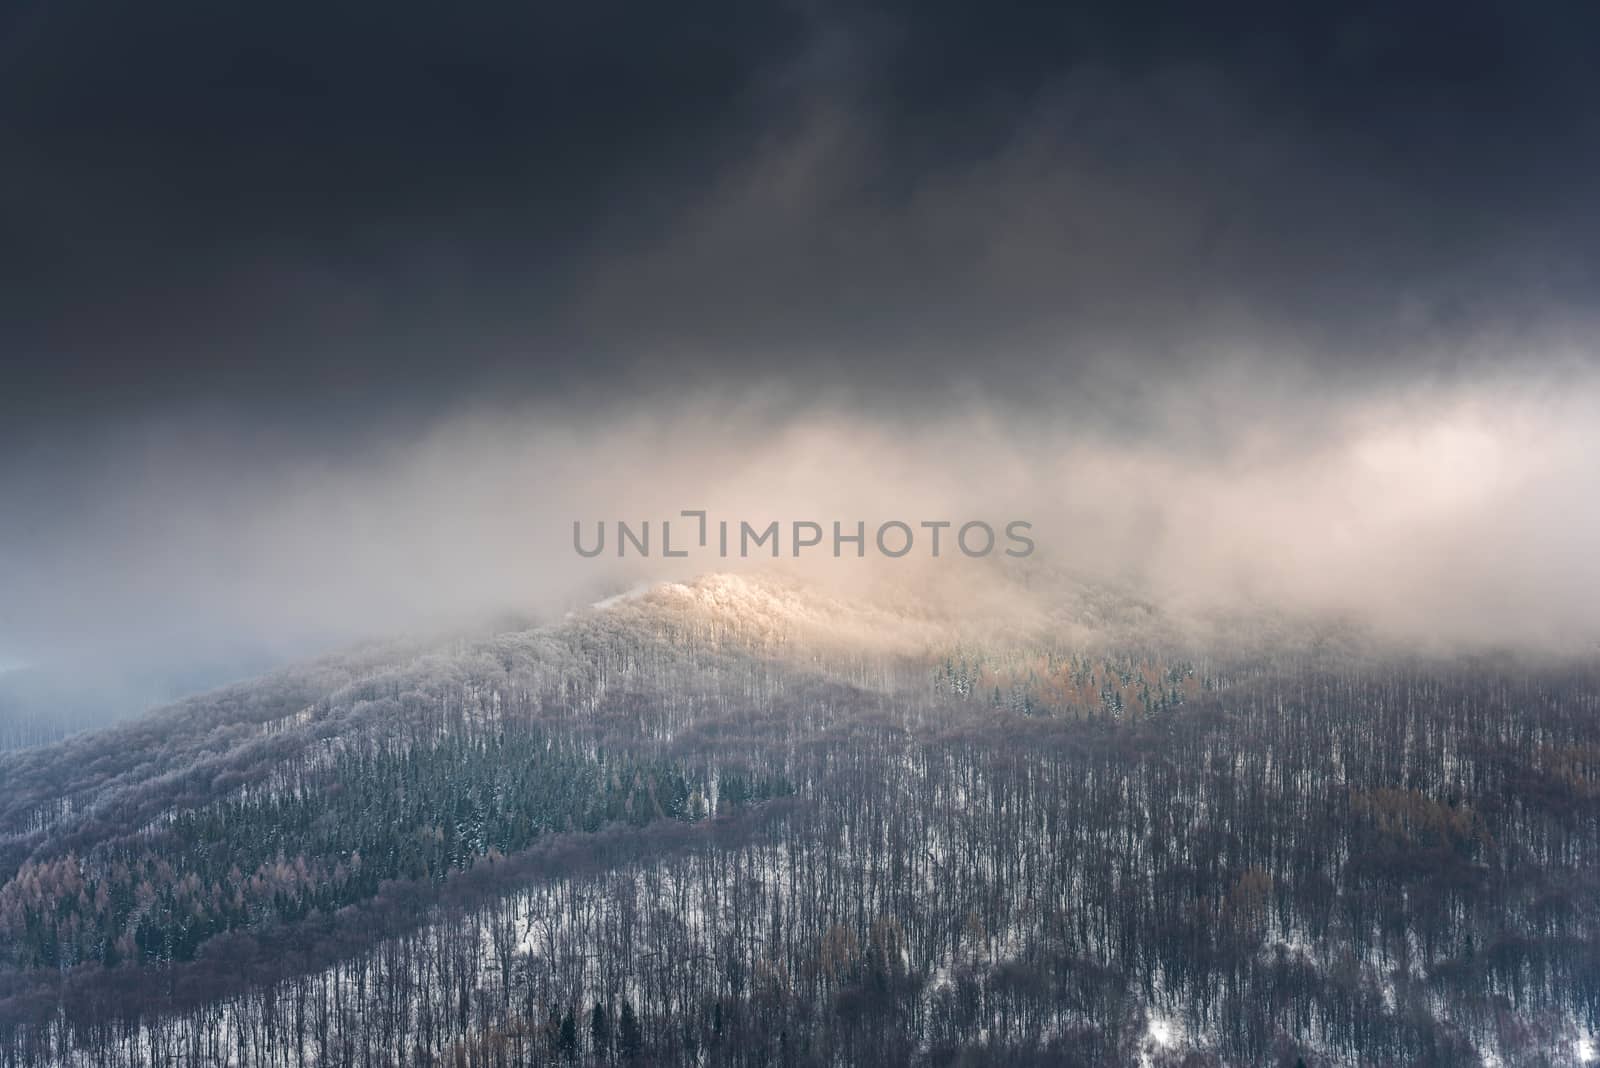 Dramatic and Moody Image of Weather in Mountains at Winter Time by merc67